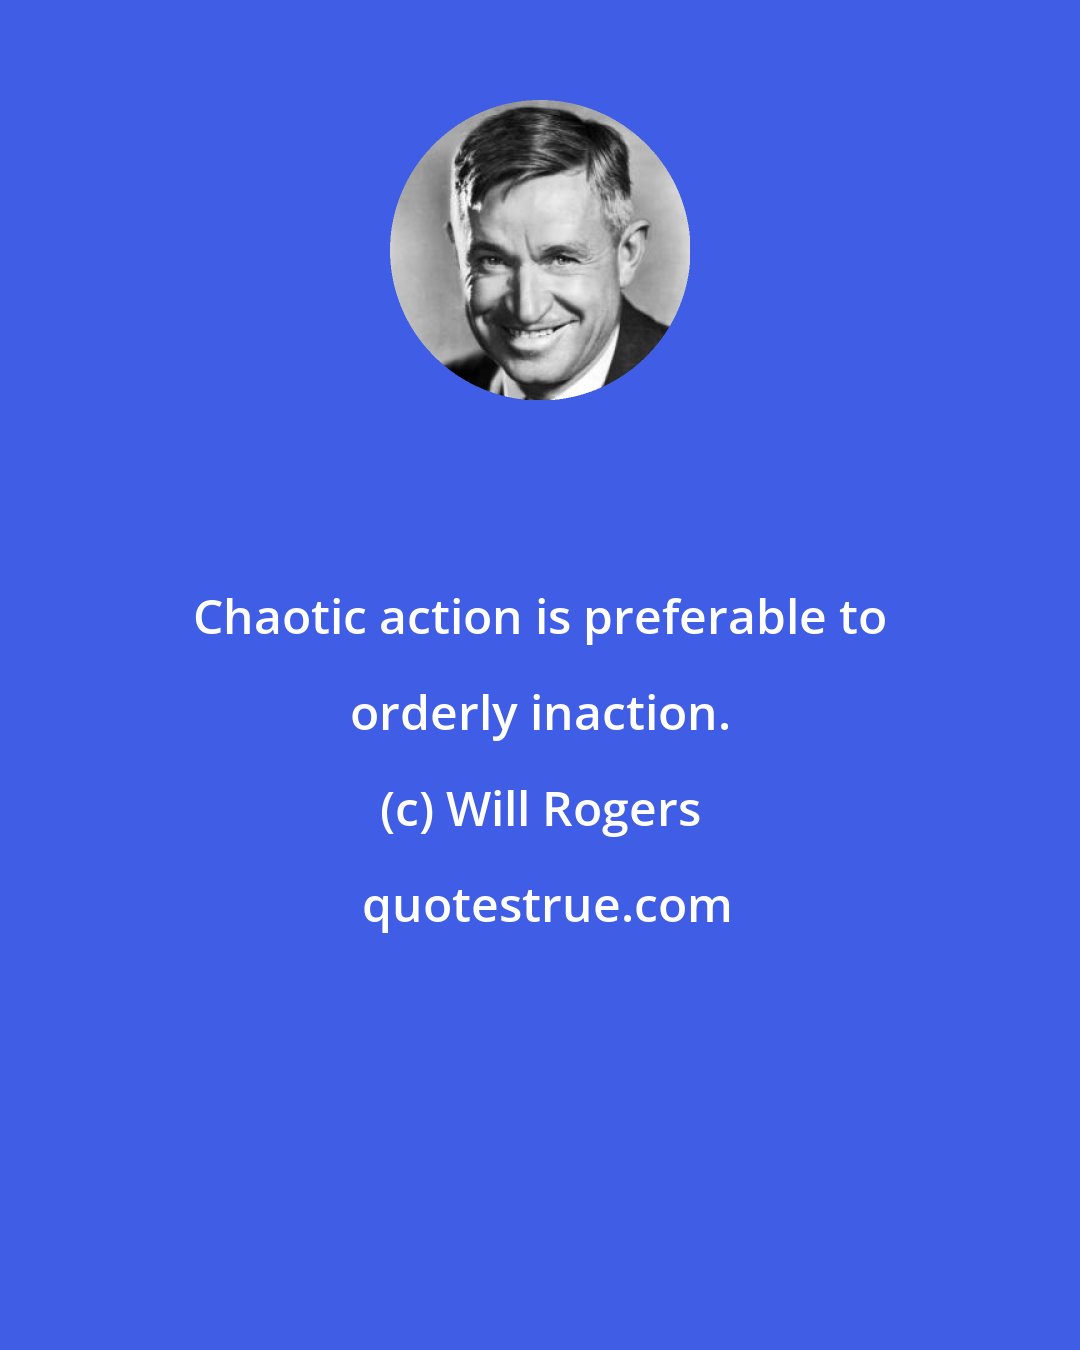 Will Rogers: Chaotic action is preferable to orderly inaction.